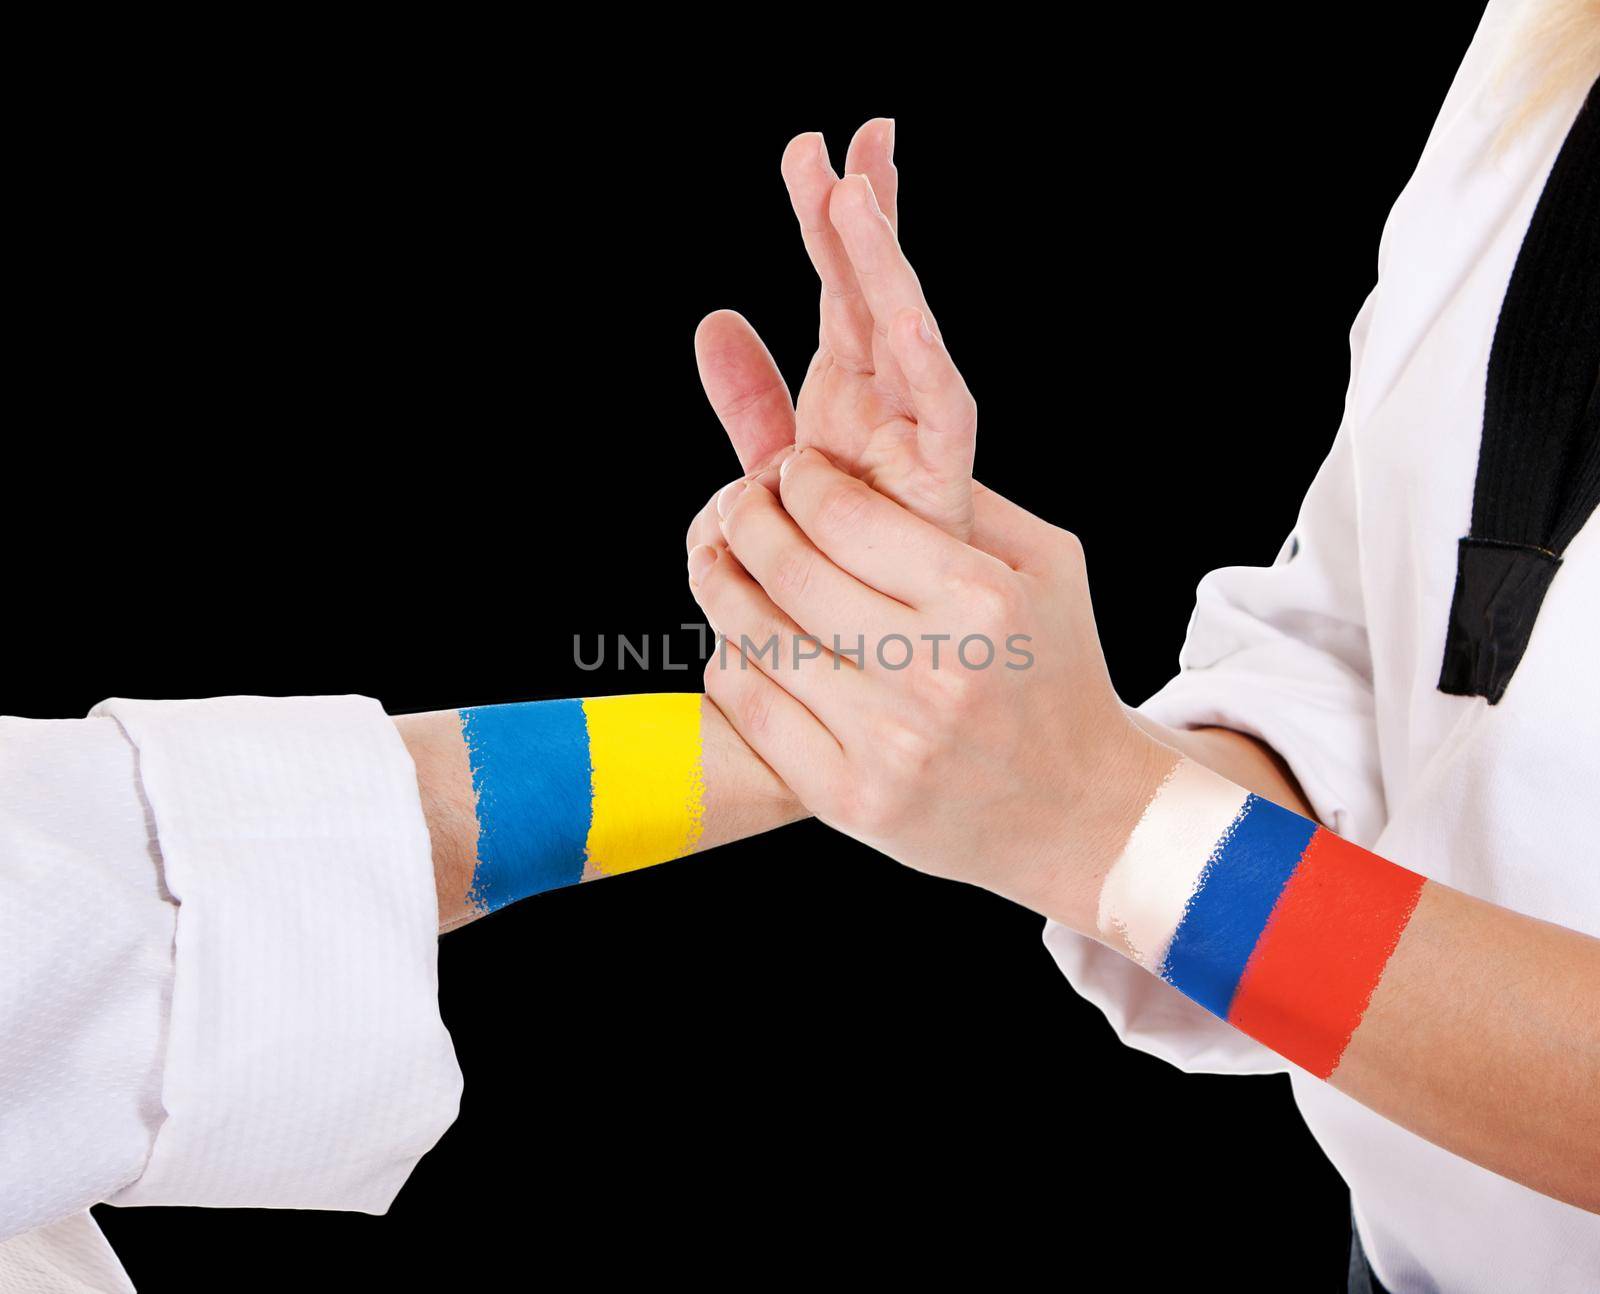 Two fighting hands of representatives of different countries Ukraine and Russia. Hold hands of two fighting people isolated on black background.